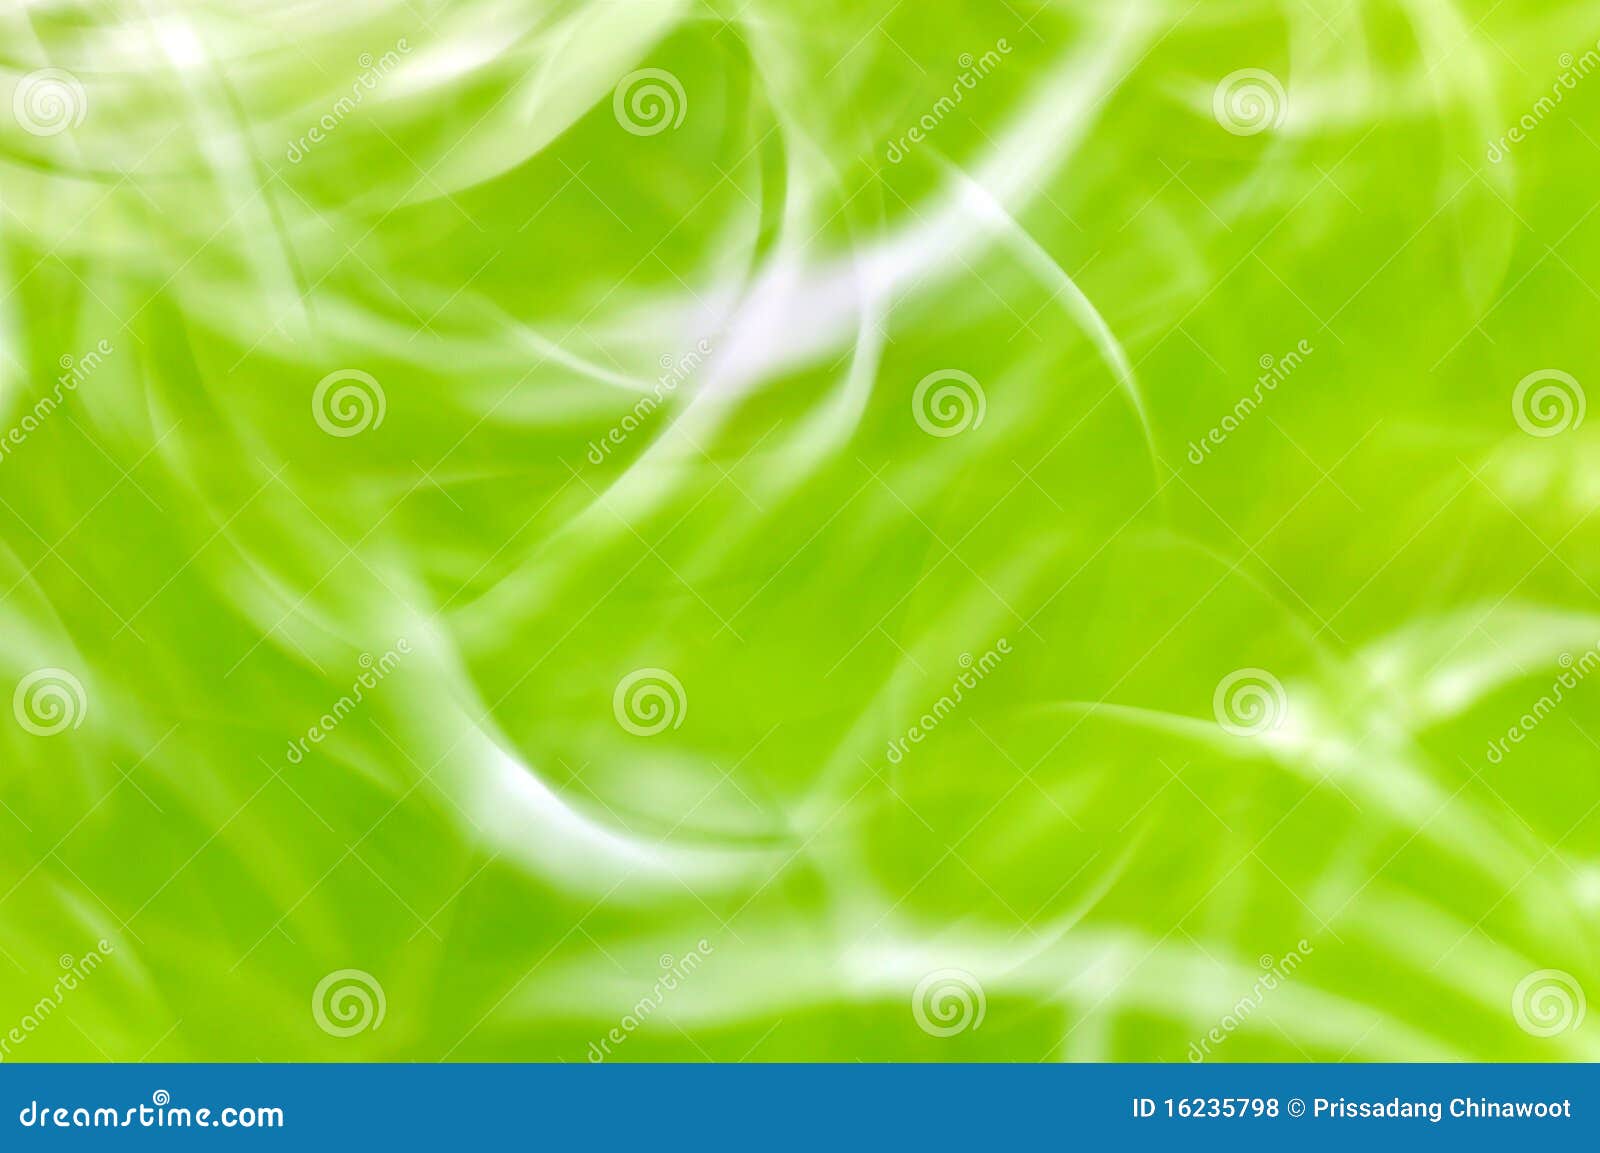 Abstract green nature. stock photo. Image of abstract - 16235798